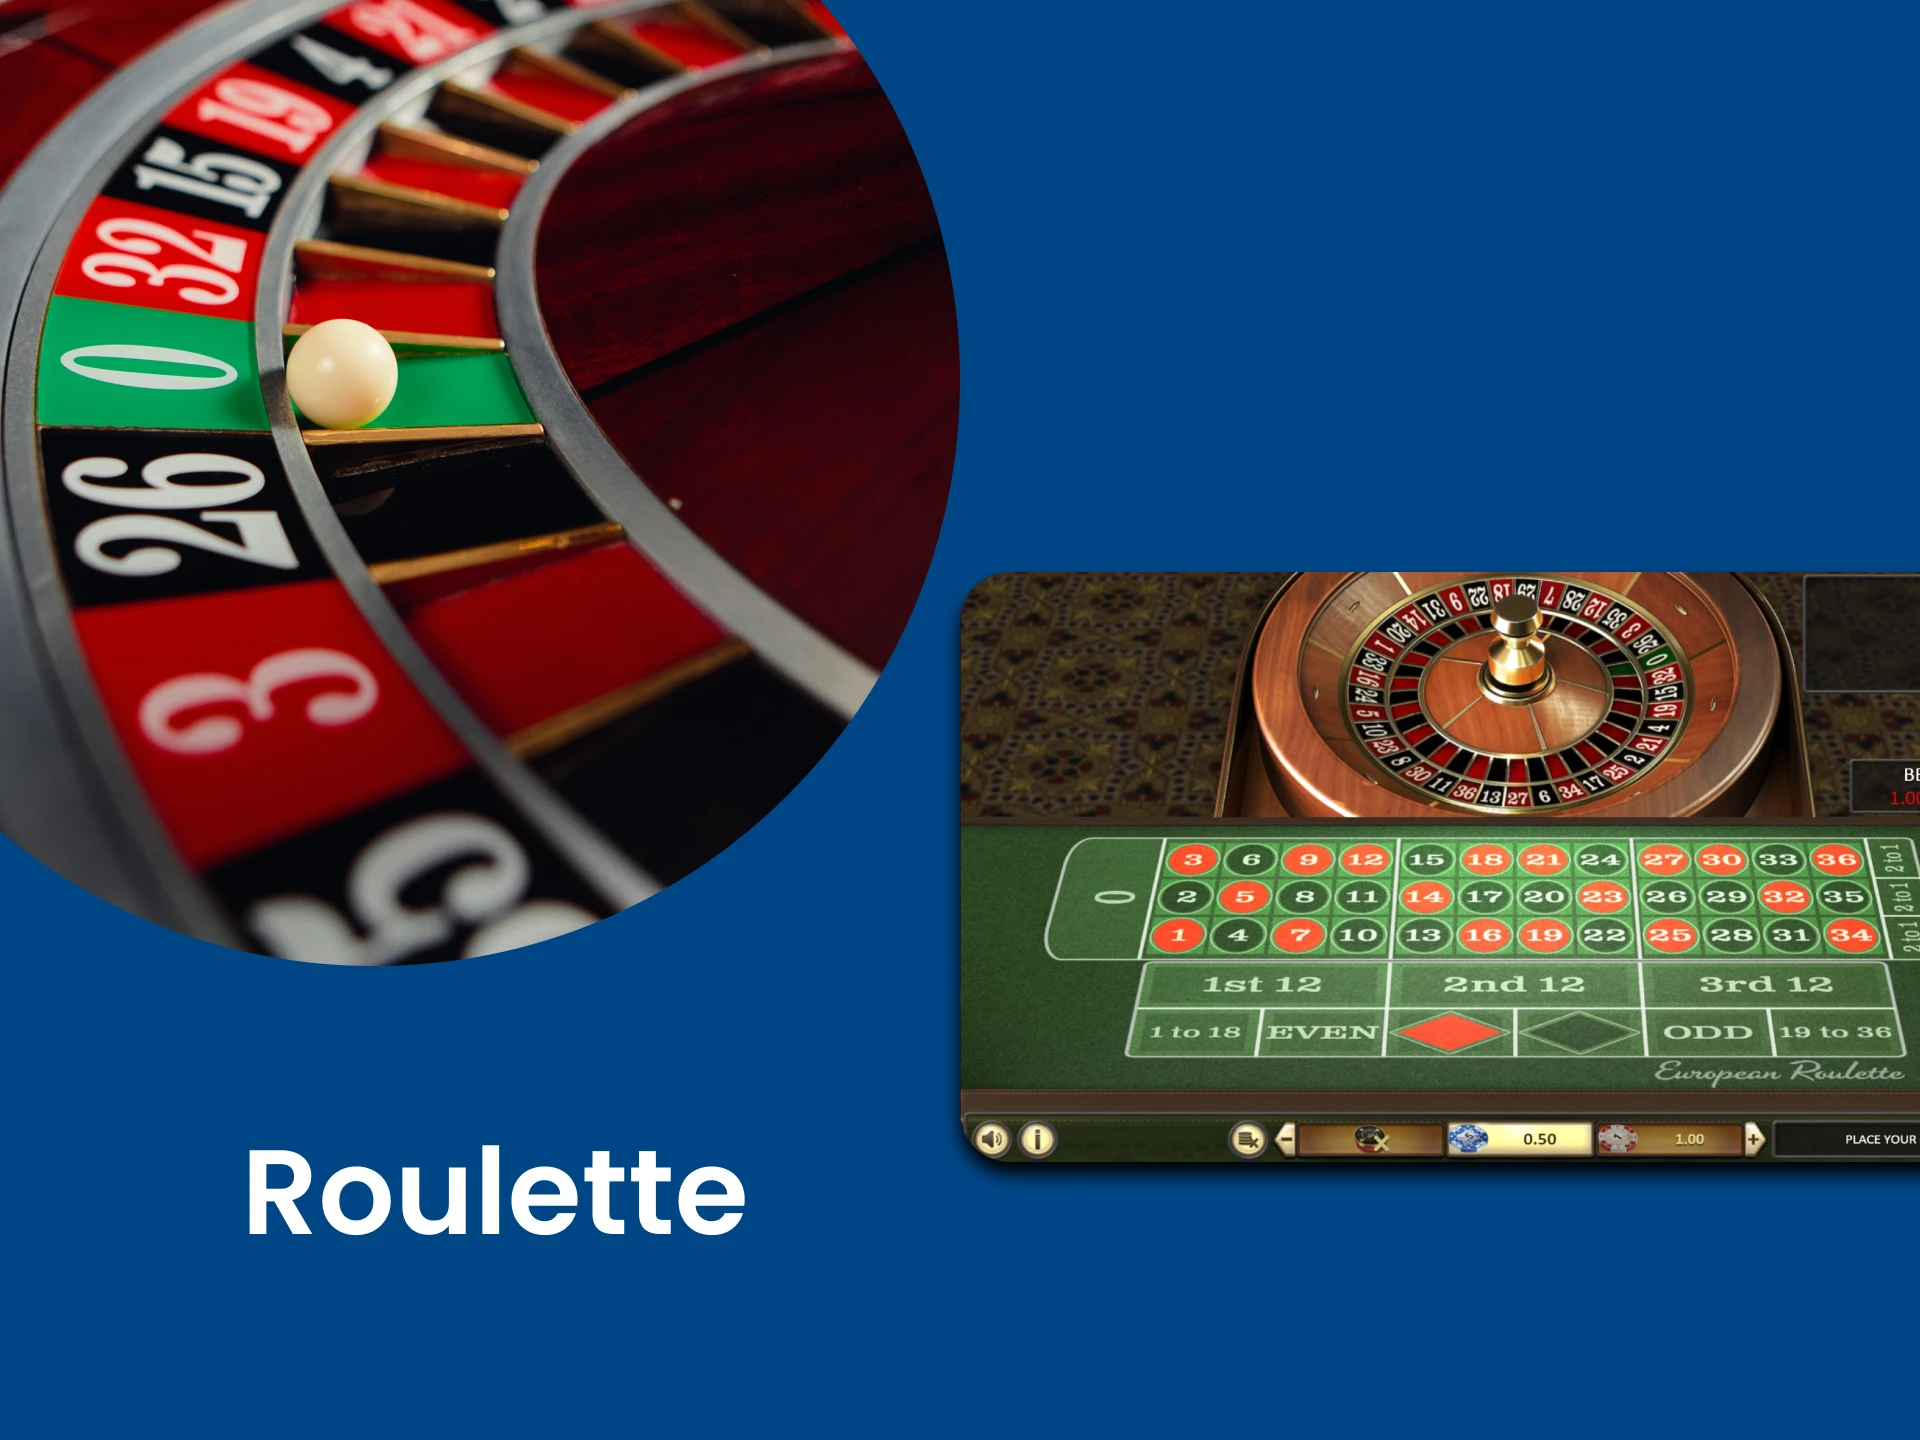 For casino fans, we recommend playing Roulette.